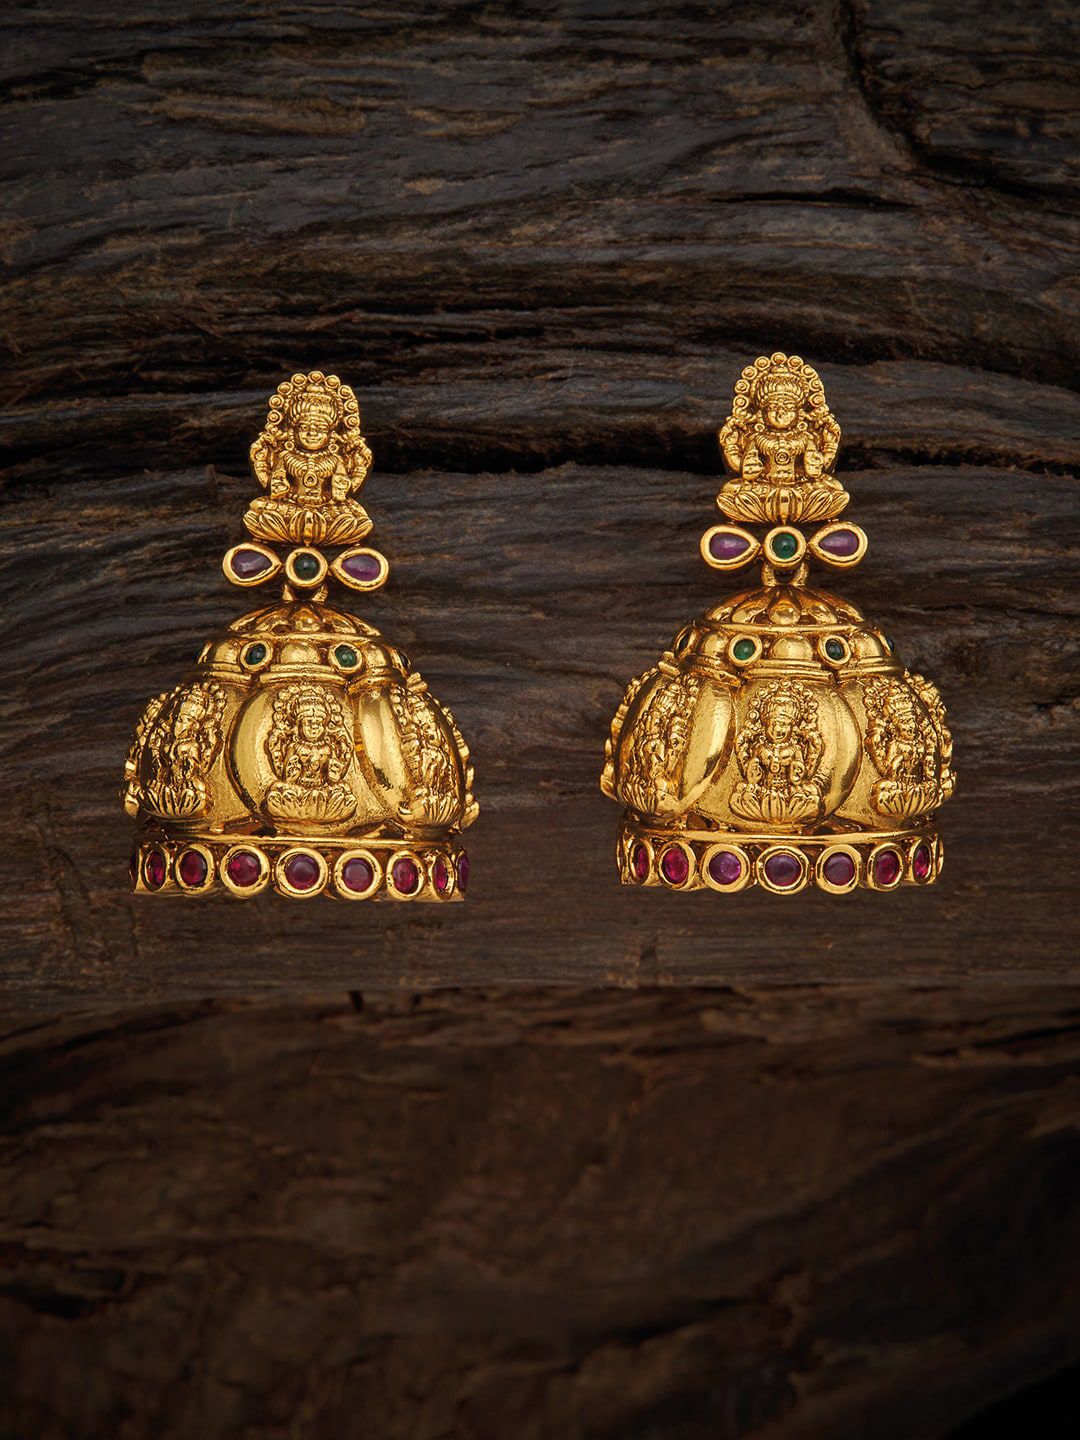 Kushal's Fashion Jewellery Red Dome Shaped Jhumkas Earrings Price in India